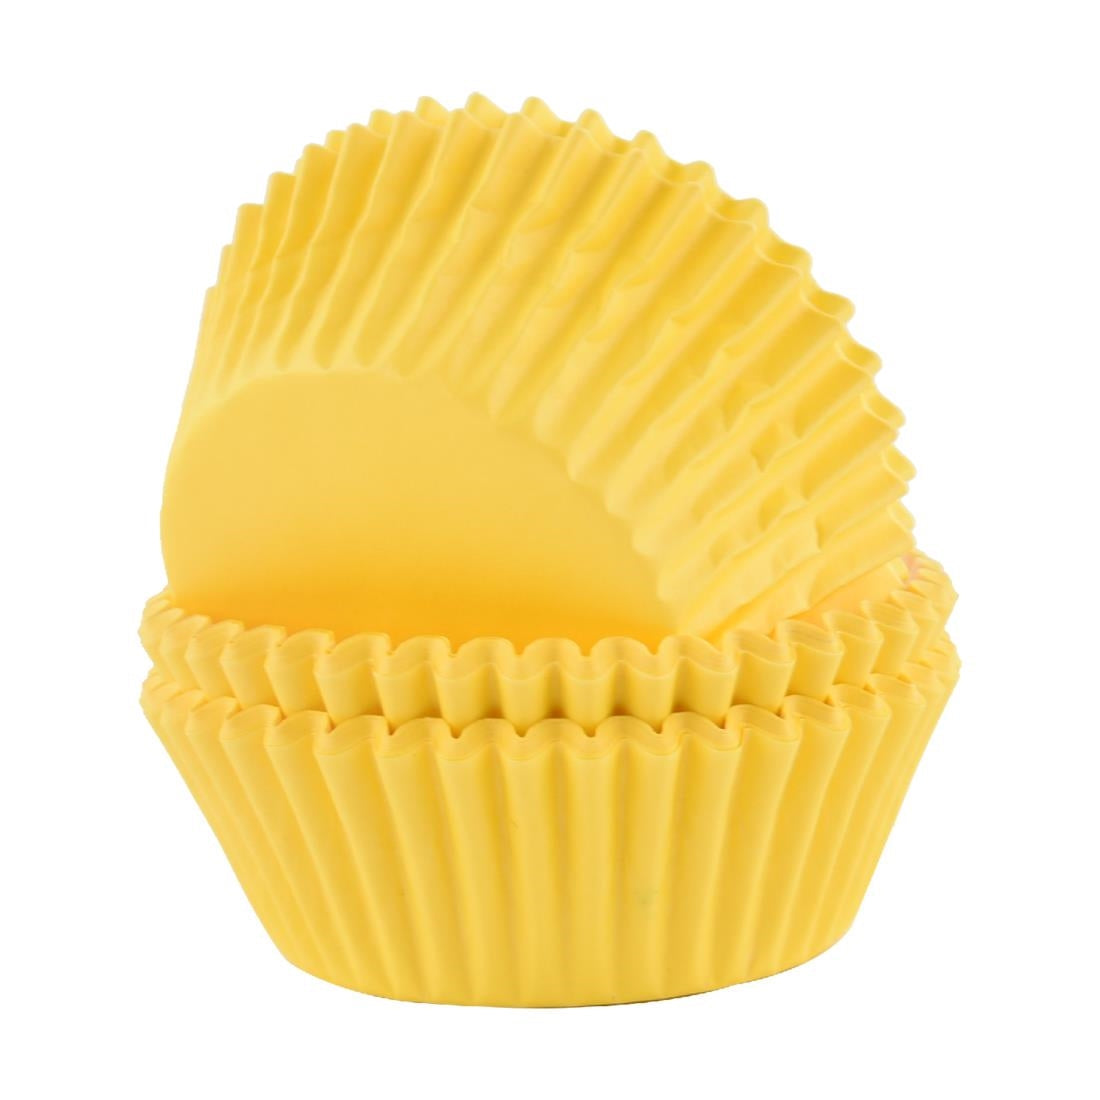 CX139 PME Block Colour Cupcake Cases Yellow, Pack of 60 JD Catering Equipment Solutions Ltd